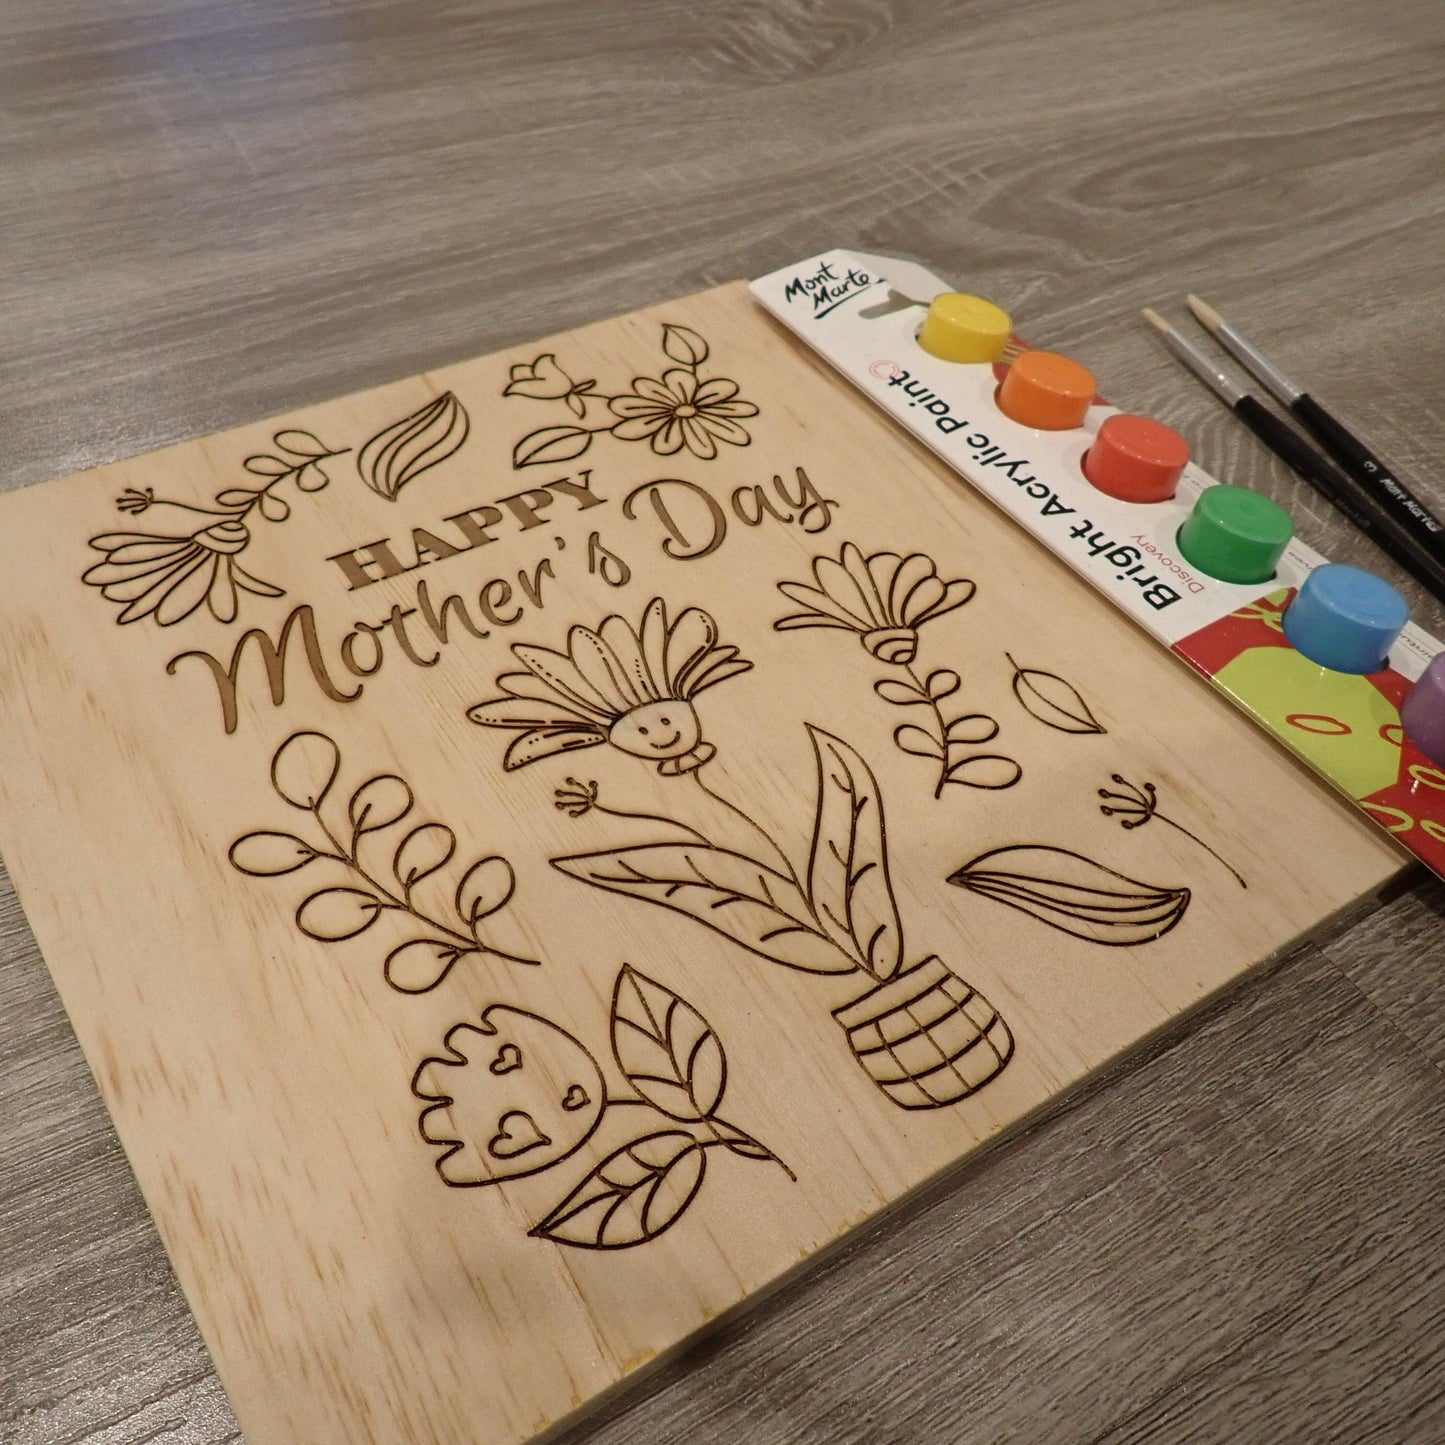 Paint your own - Mothers Day themed - Burning Man Designs